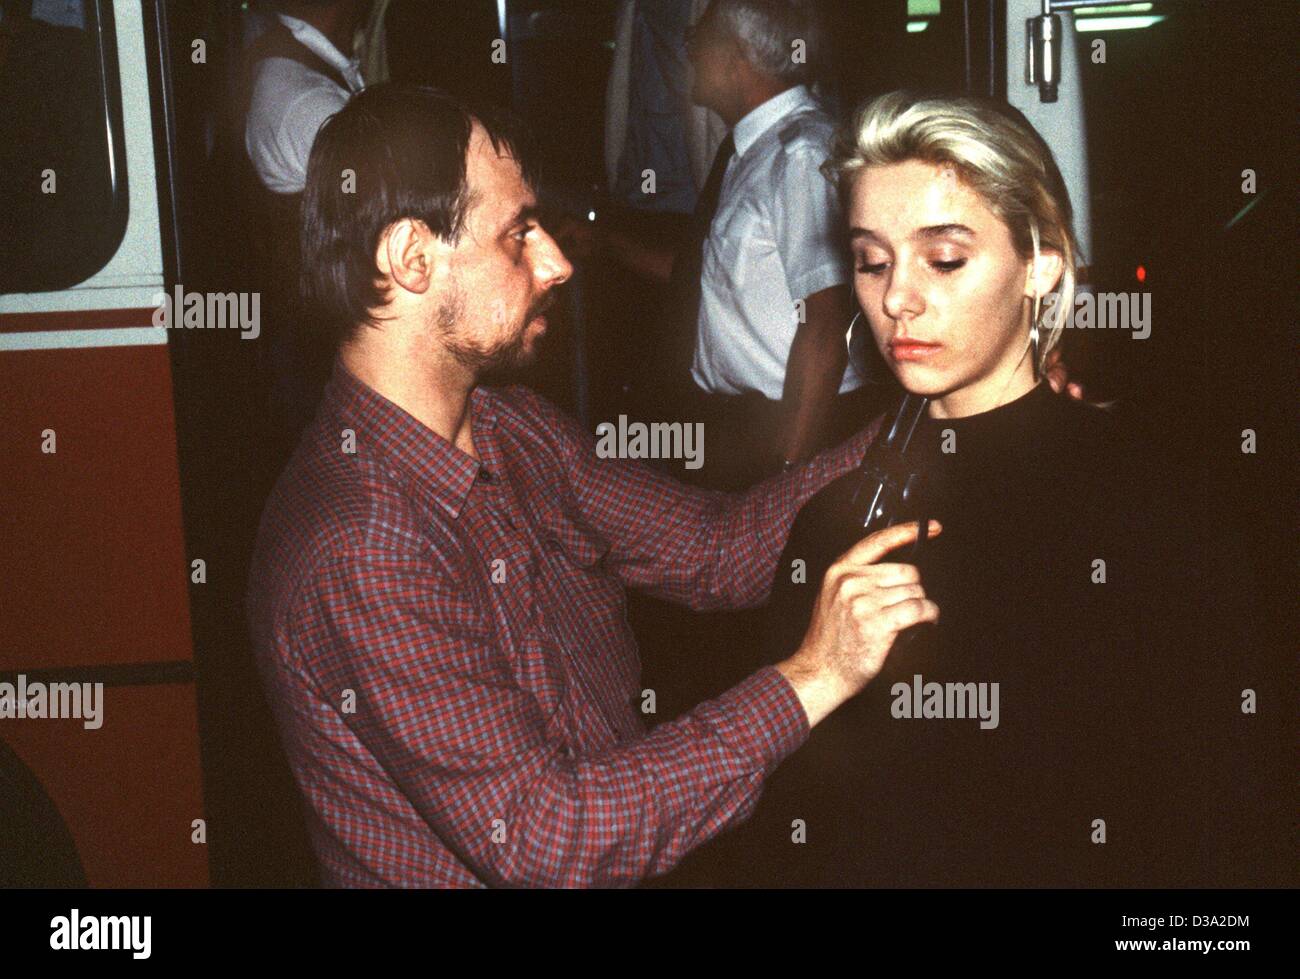 (dpa files) -  Dieter Degowski holds the hostage Silke Bischoff at gunpoint after they robbed a bank in Gladbeck-Rentfort, Germany, 17 August 1988. During the hostage crisis the bank robbers killed two hostages and a policeman died in a chase. The police stopped the gangsters by force of arms on the Stock Photo